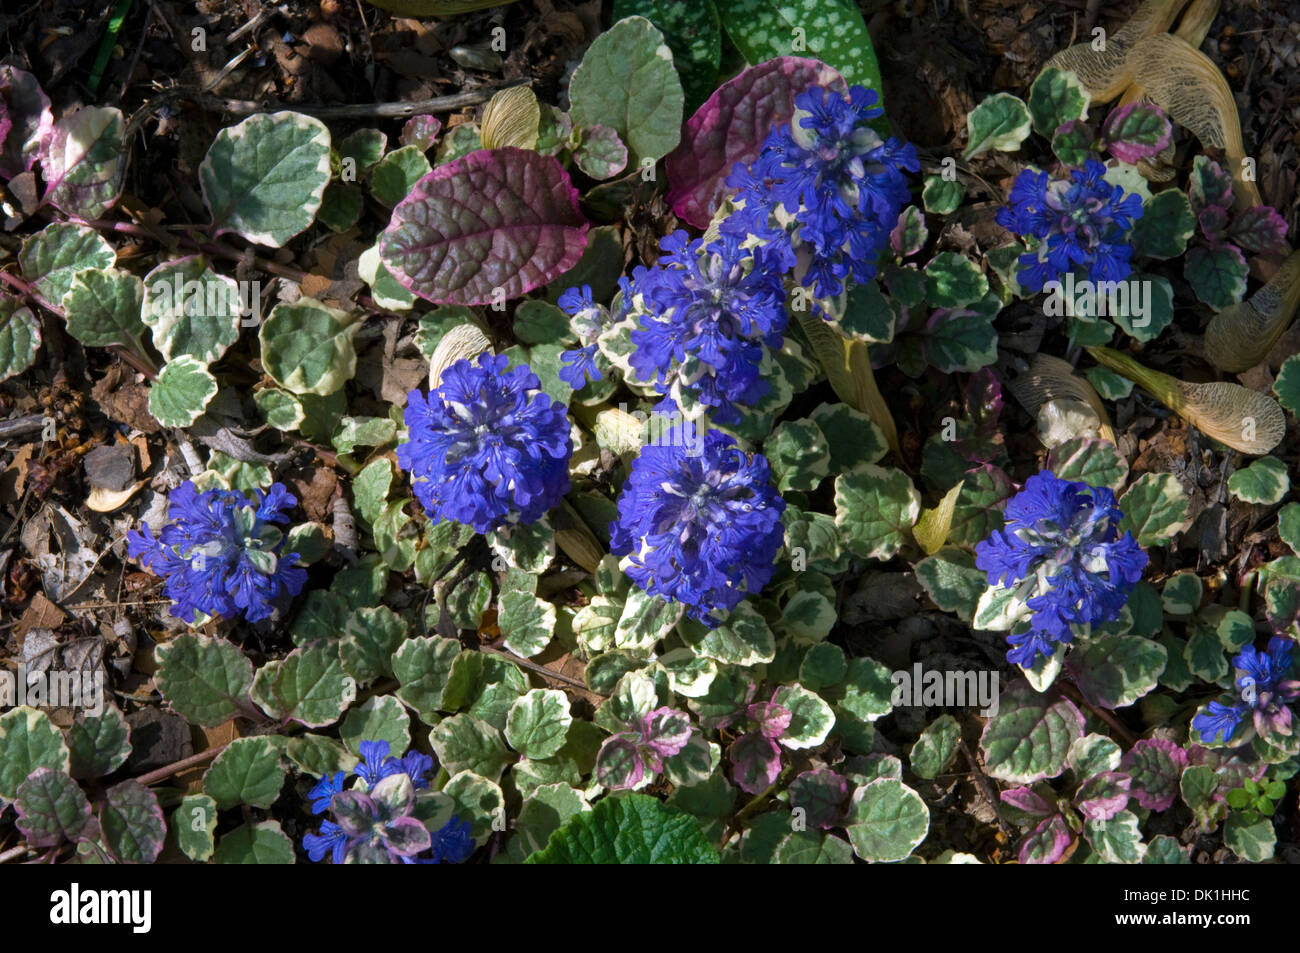 Unknown type of very small violet blue flowers, with Maple seeds as a scale to their size. Stock Photo